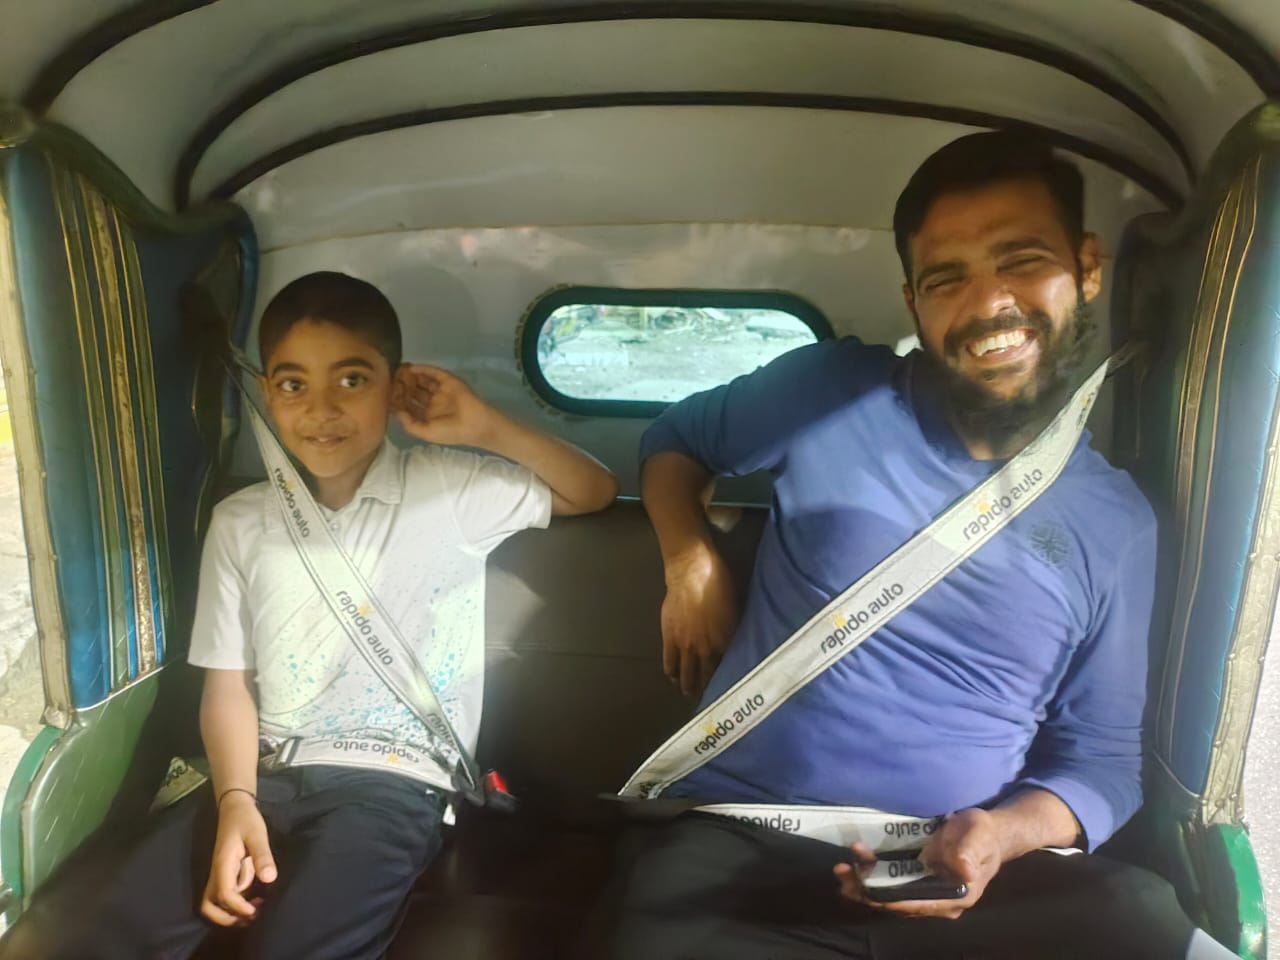 Rapido prioritizes Passengers’ Road Safety with Seatbelts in Bengaluru Auto-rickshaws in a nationwide campaign